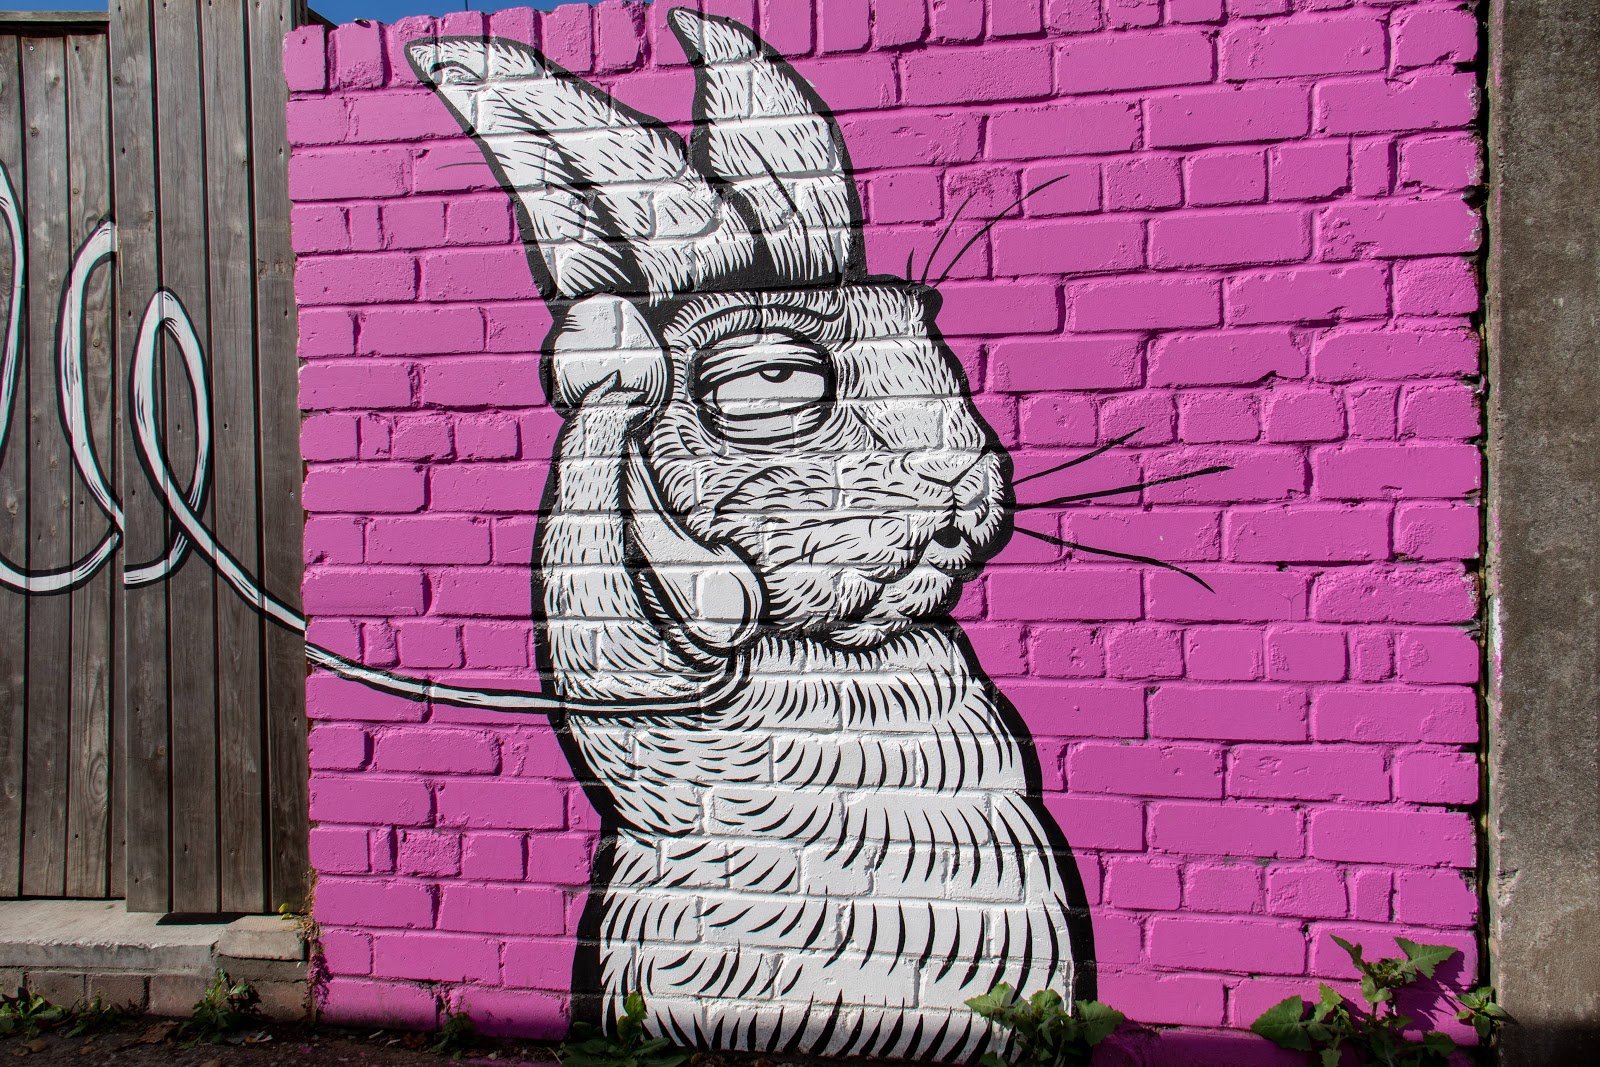 Mural on a brick wall of a rabbit calling